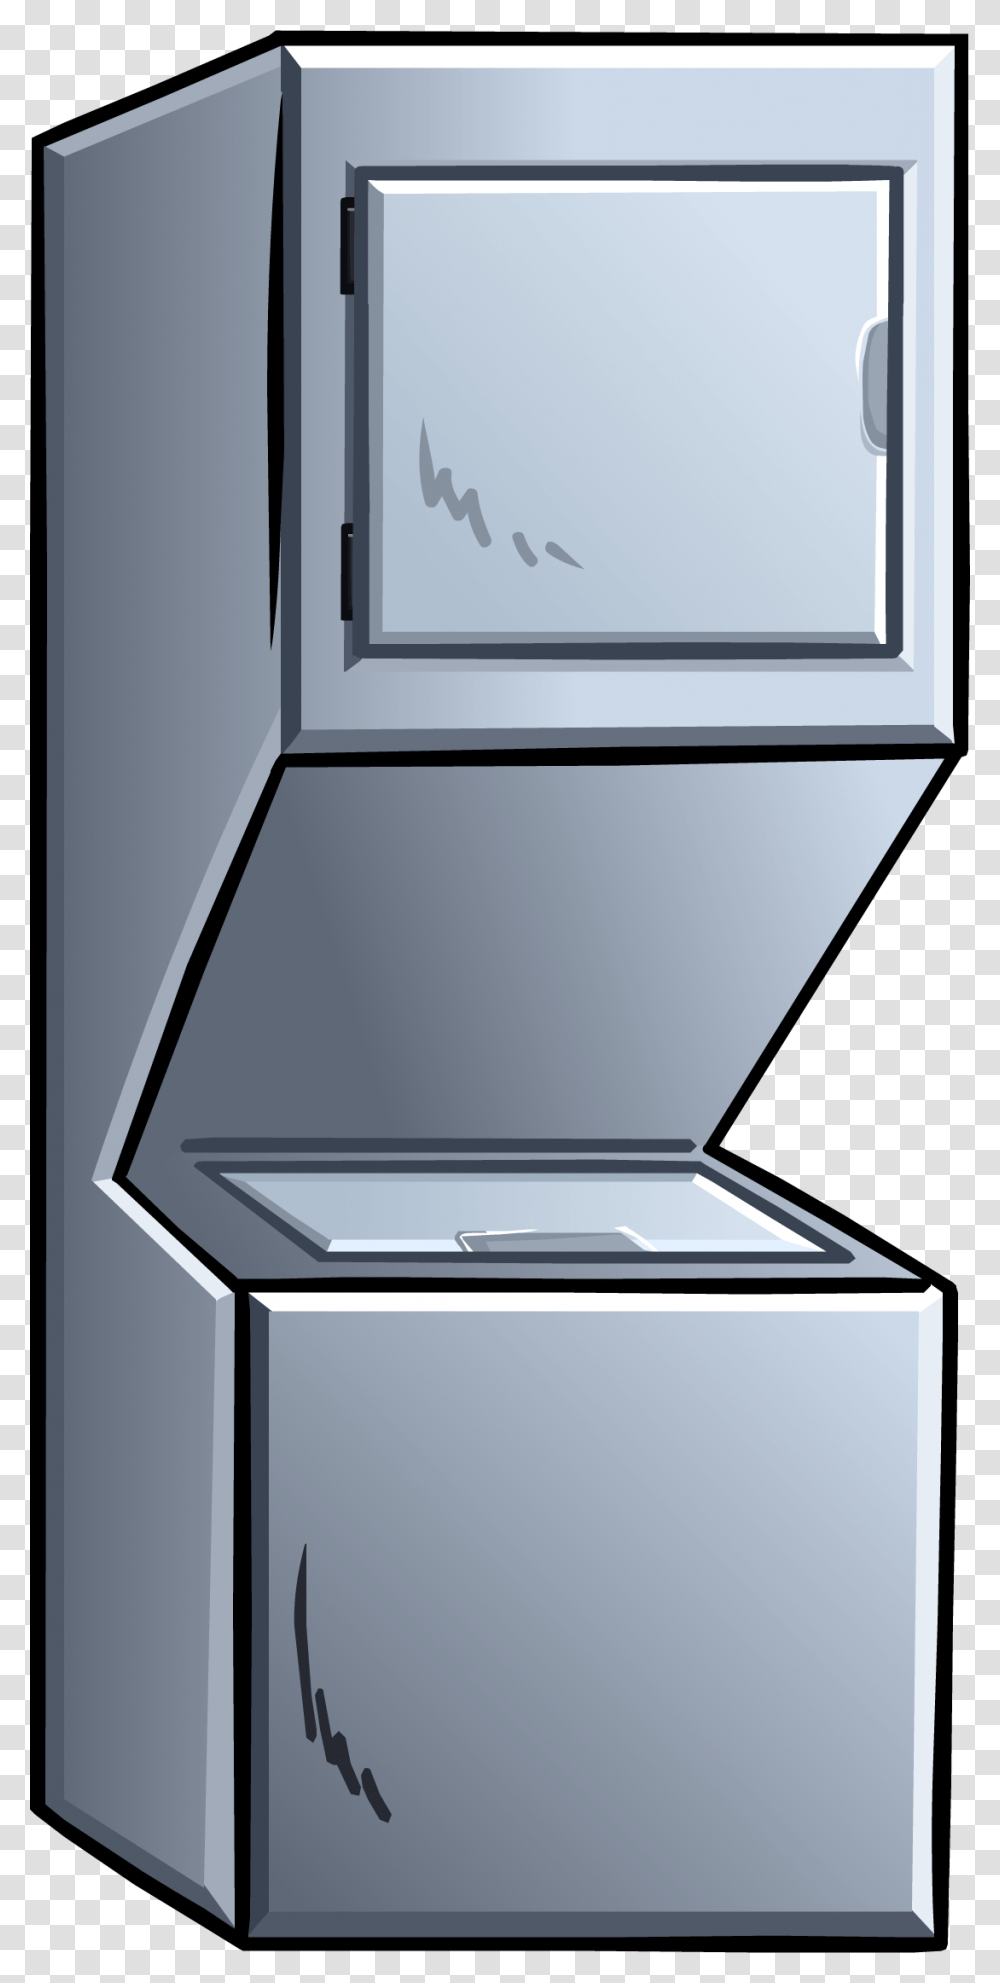 Stacking Washer And Dryer Club Penguin Washing Machine, Appliance, Mailbox, Letterbox, Refrigerator Transparent Png